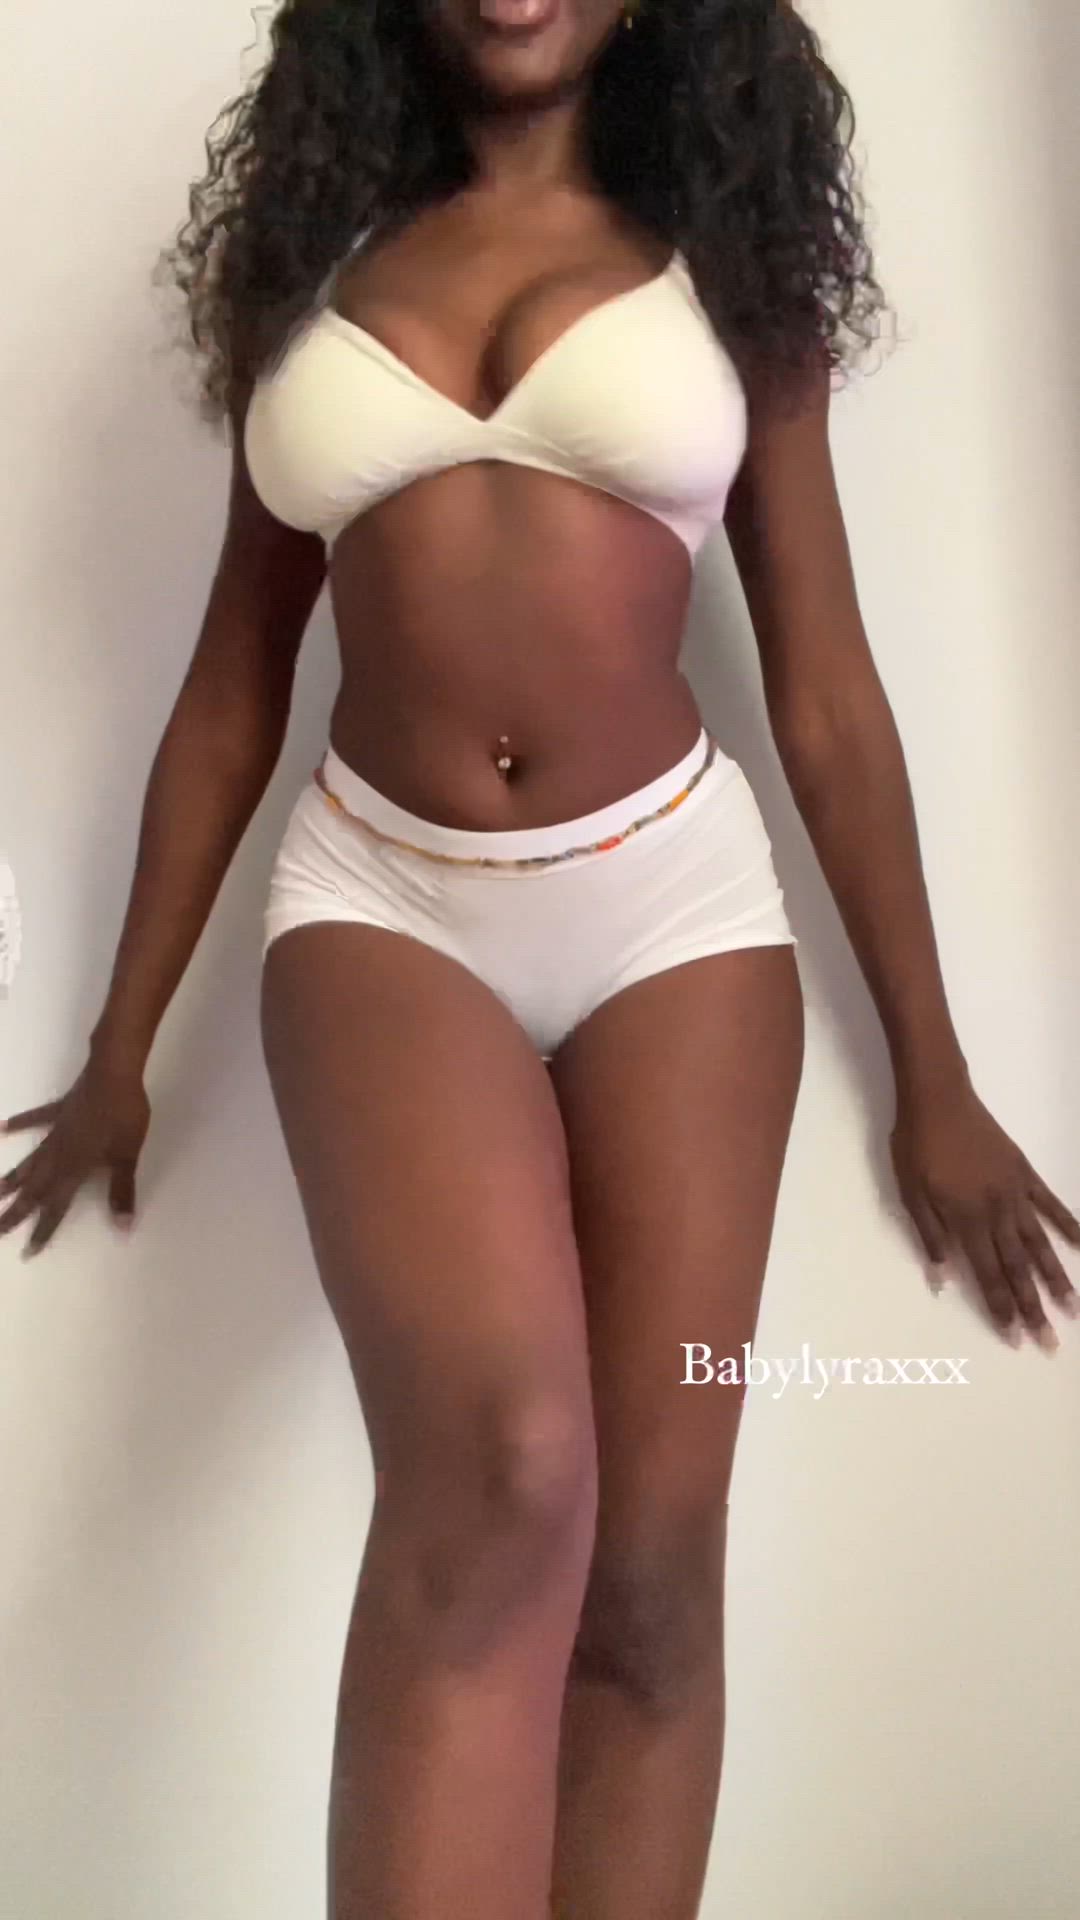 Big Tits porn video with onlyfans model Babylyraxxx <strong>@babylyraxxx</strong>